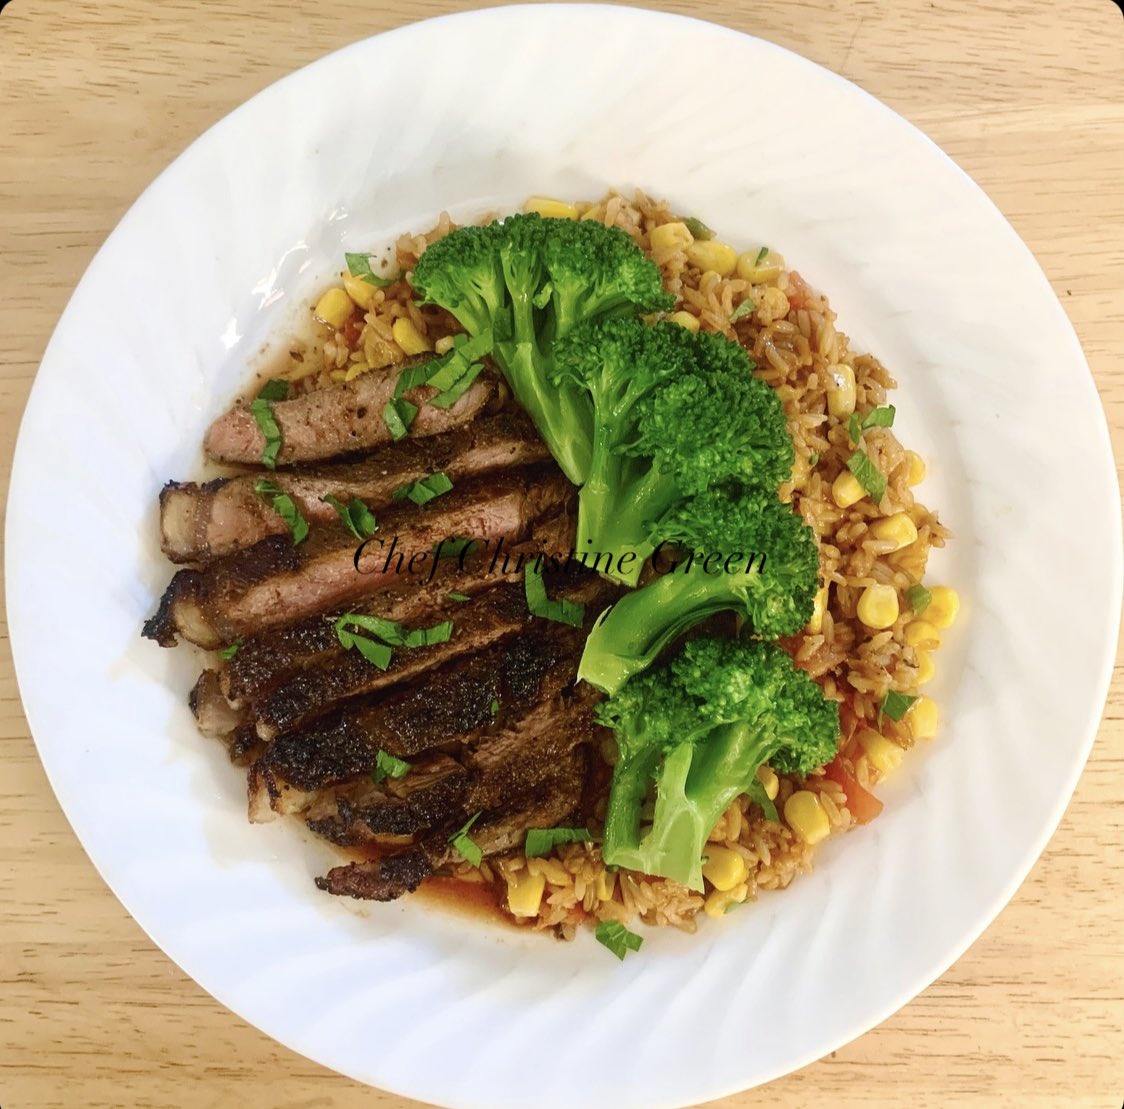 Mouthwatering pan seared black pepper steak with Spanish rice and steamed broccoli 🥩